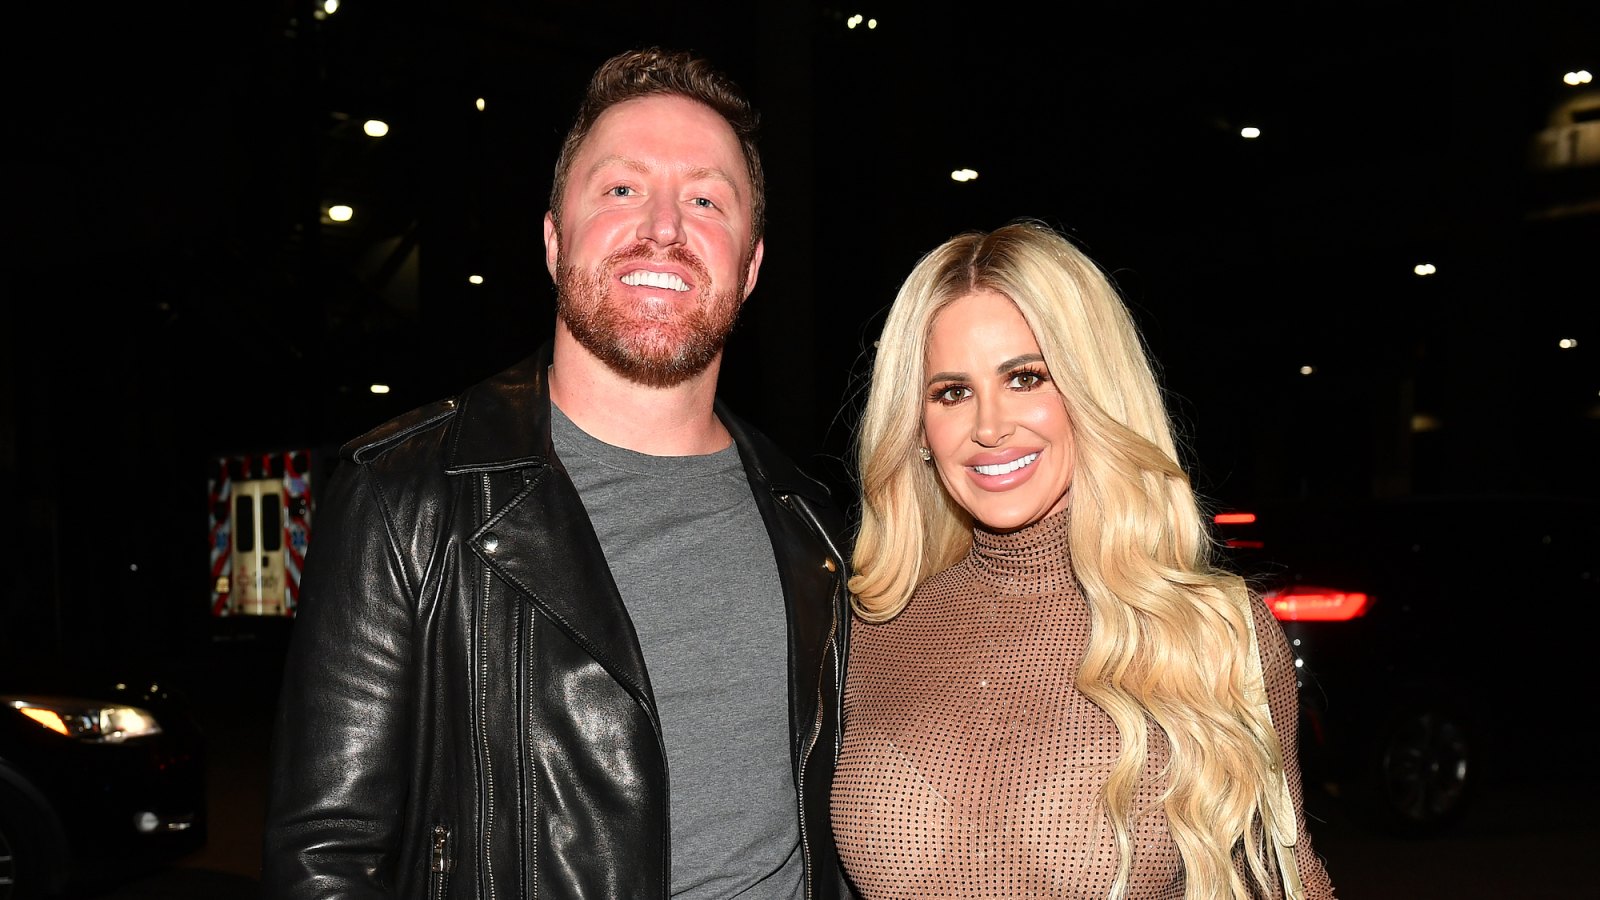 Kim Zolciak and Kroy Biermann 'Could Be Off' Again After Reconciliation